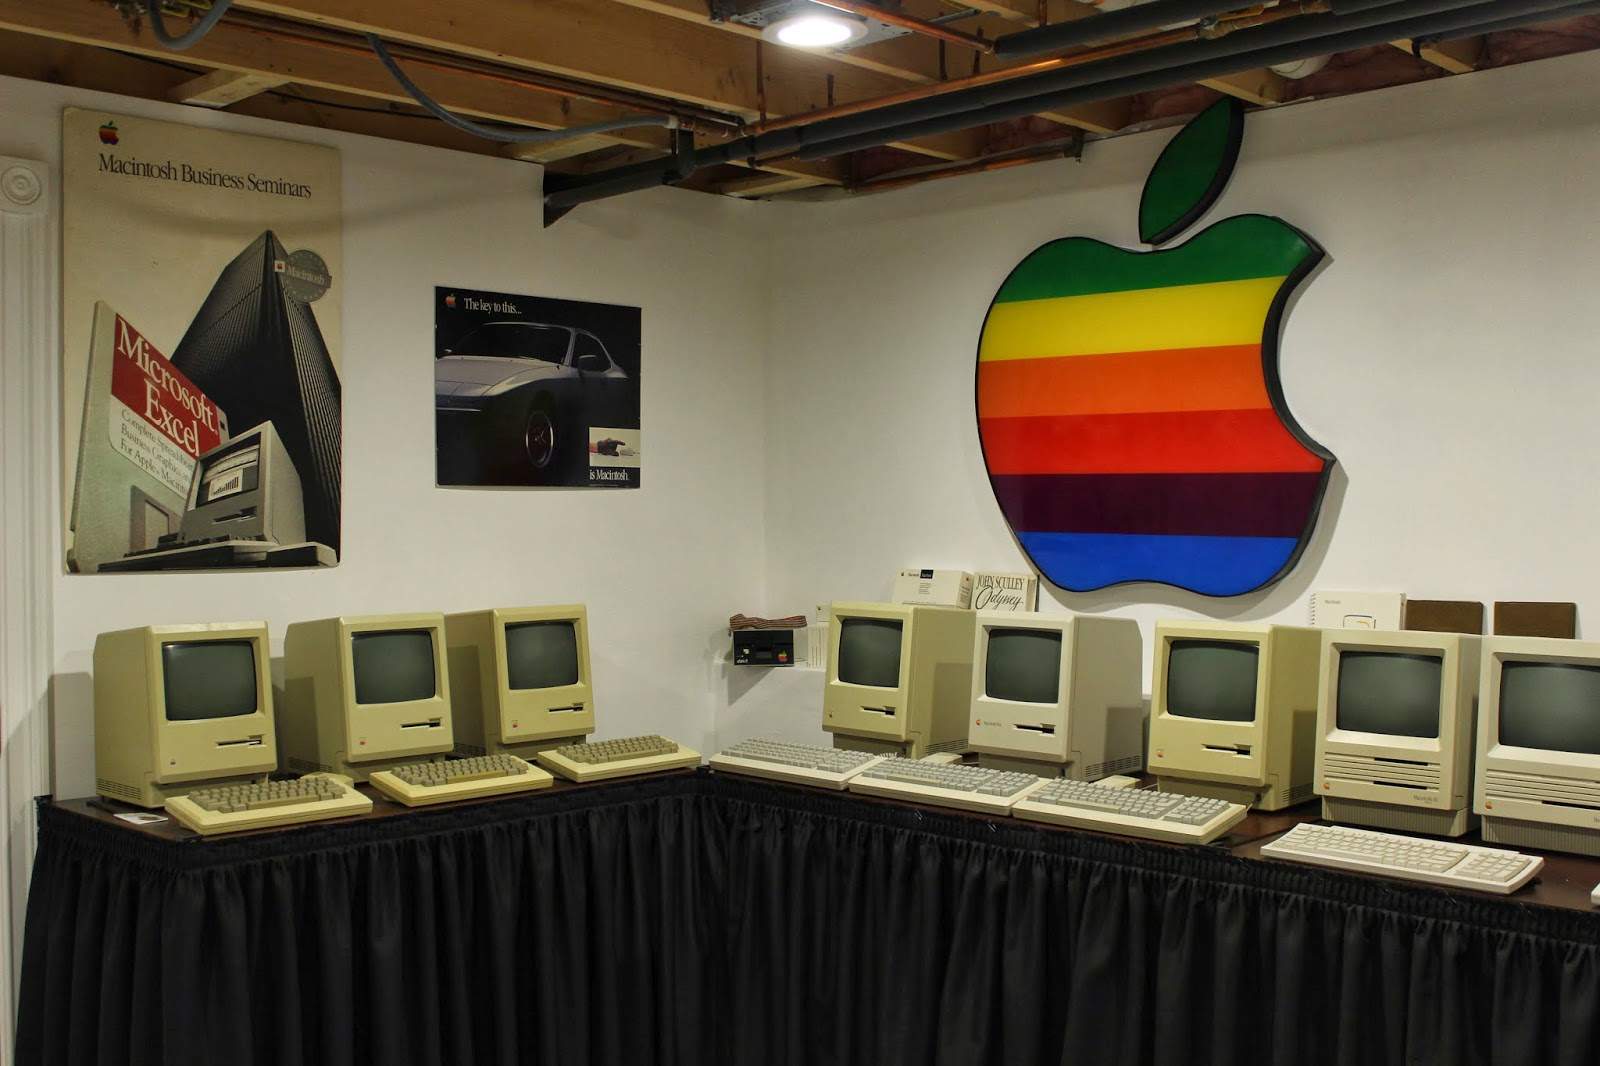 One of the world's most impressive collection of Apple artifacts belongs to a 15-year-old kid.